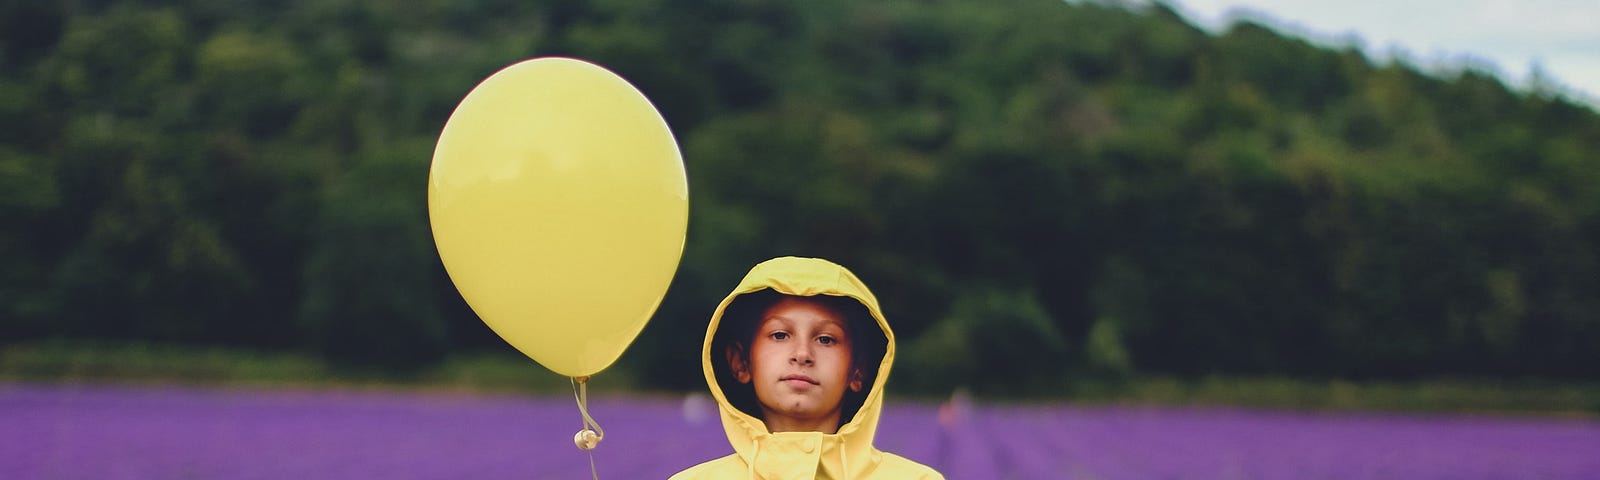 A woman standing in a filed of purple lavender in a yellow rain coat hiolding a yellow balloon.